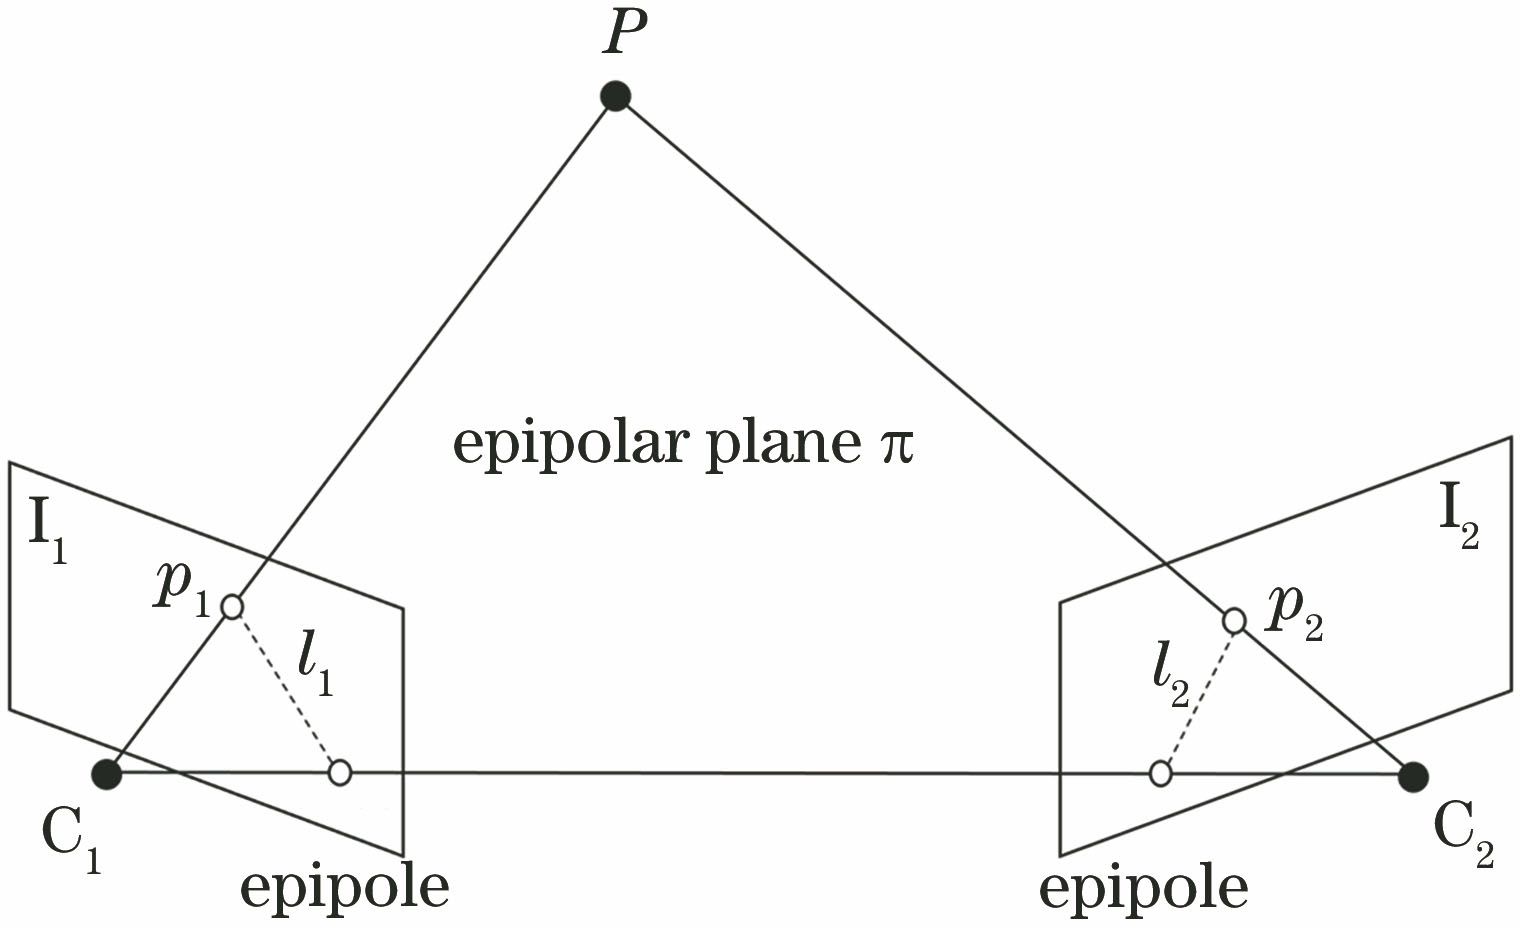 Epipolar geometry of a point